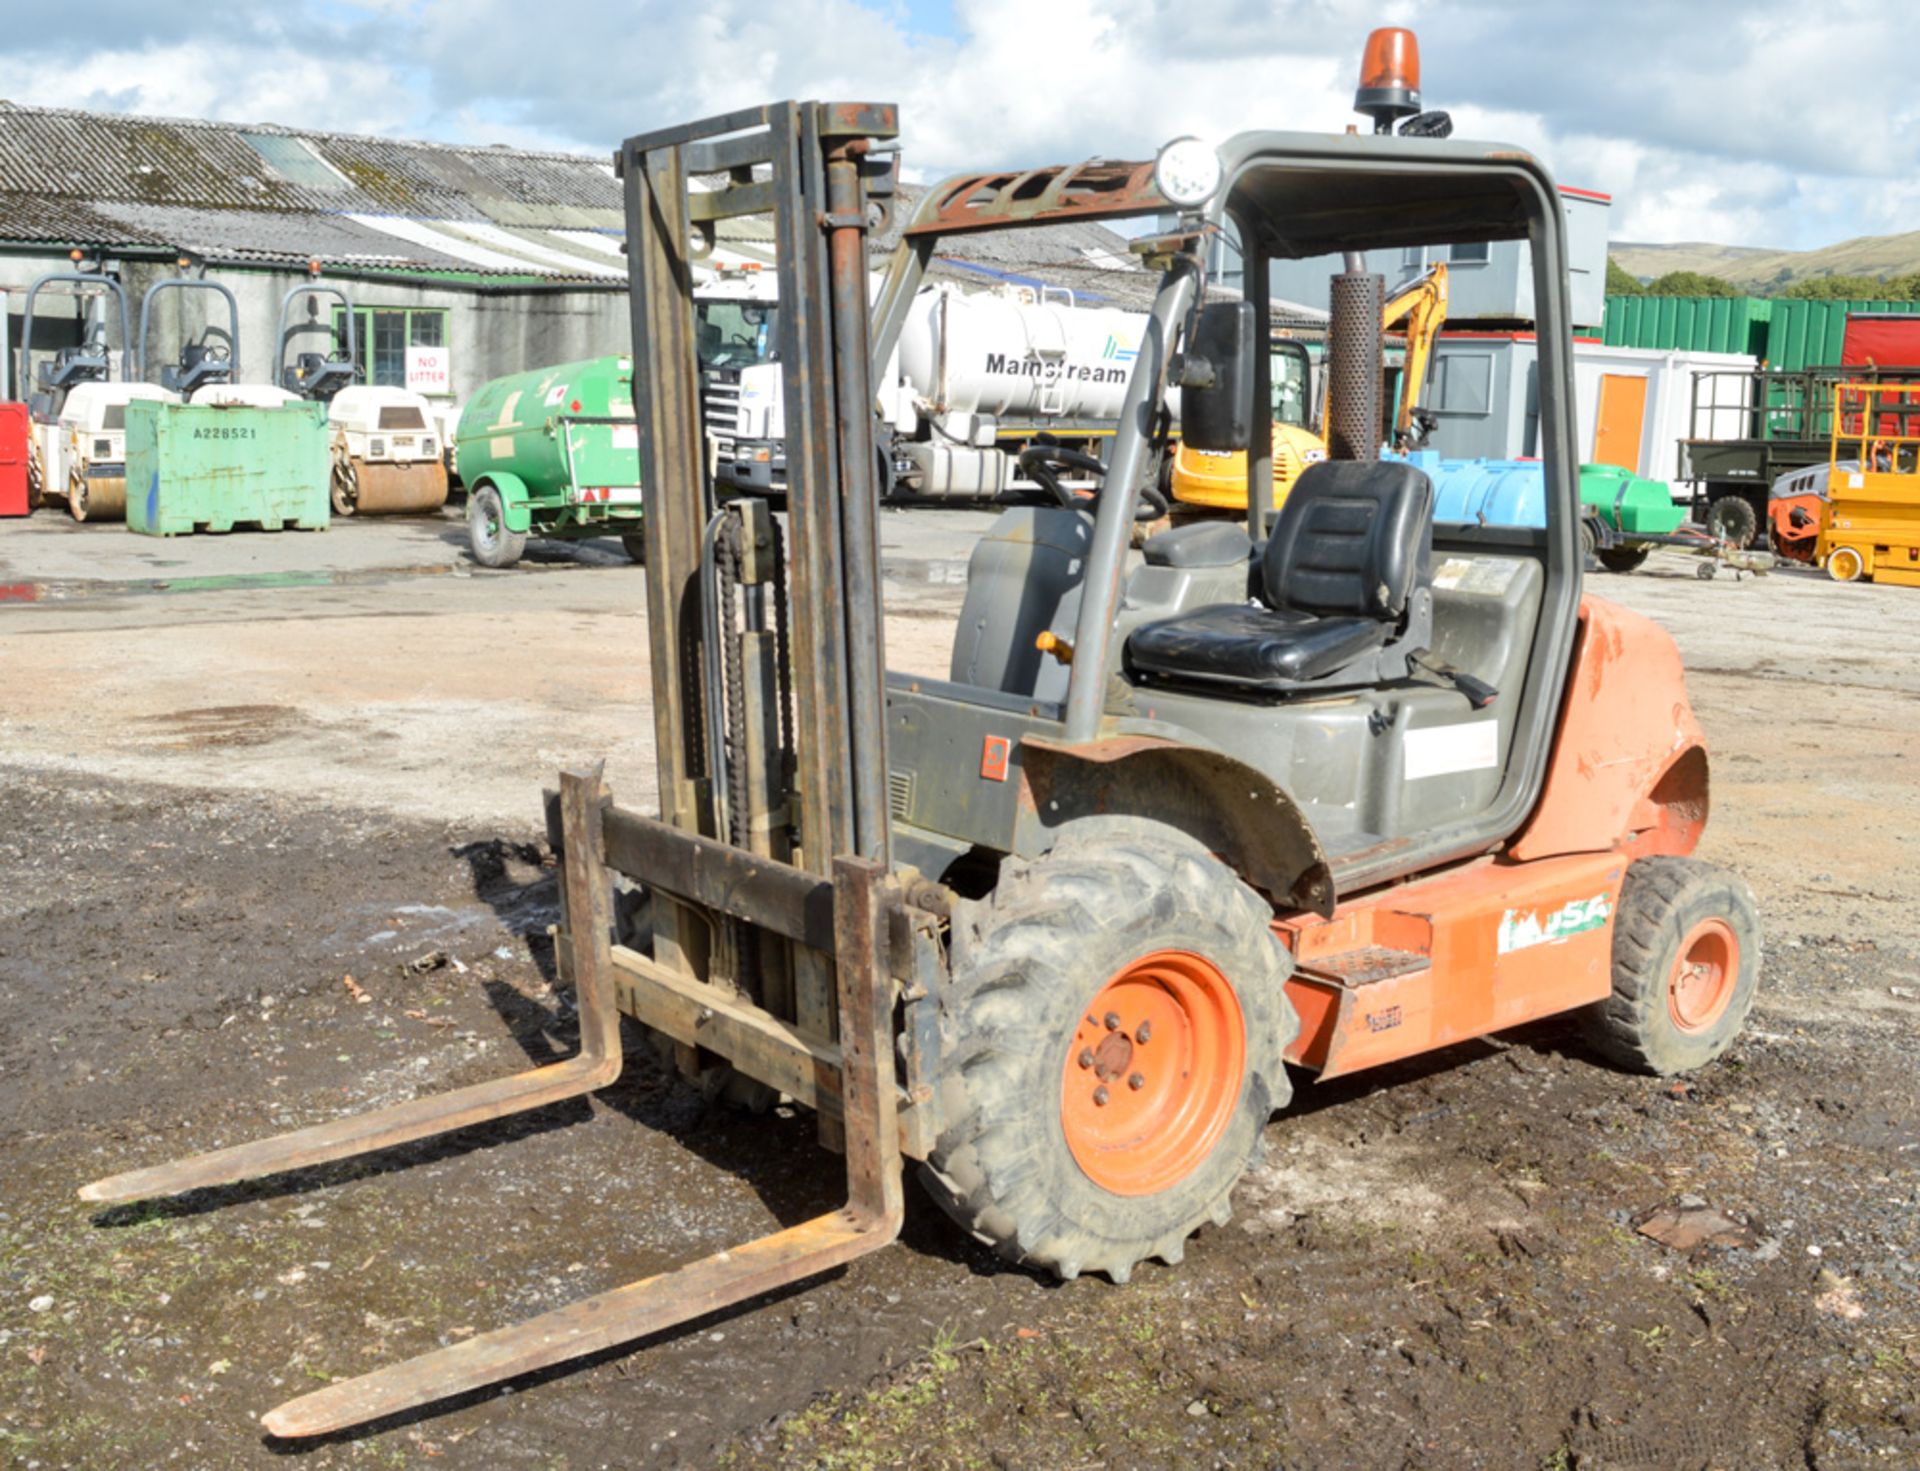 Ausa C150 H diesel driven fork lift truck Year: 2007 S/N: 1205896 Recorded Hours: 1706 A442765 **